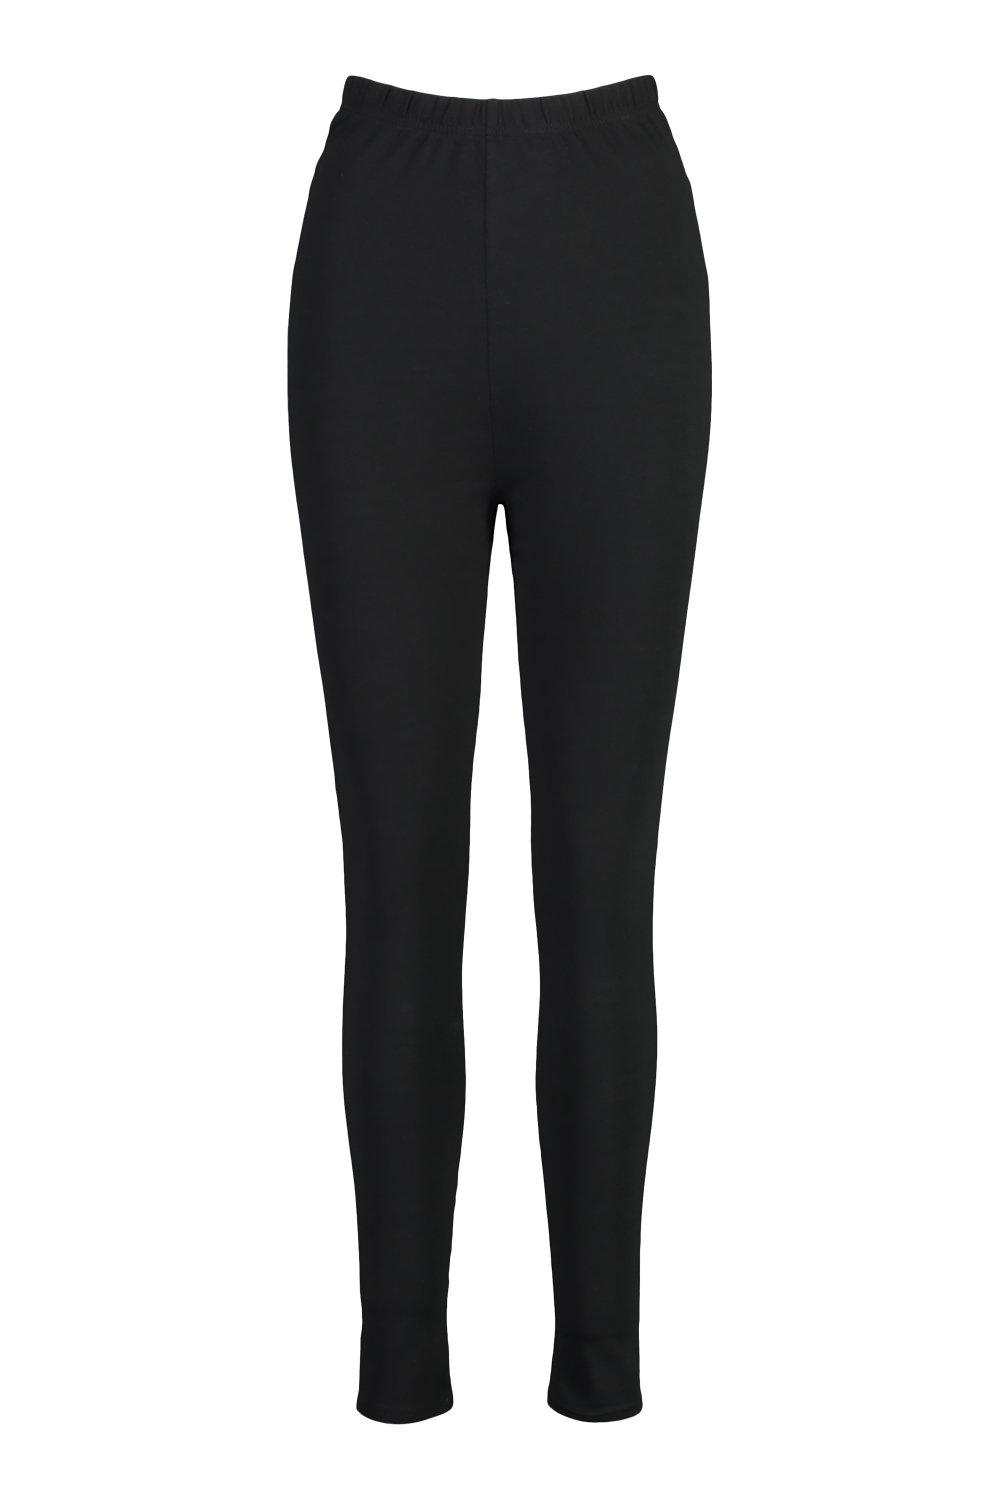 Boohoo leggings - Women's size 12 - Black, lightweight, relaxed fit, NEW..